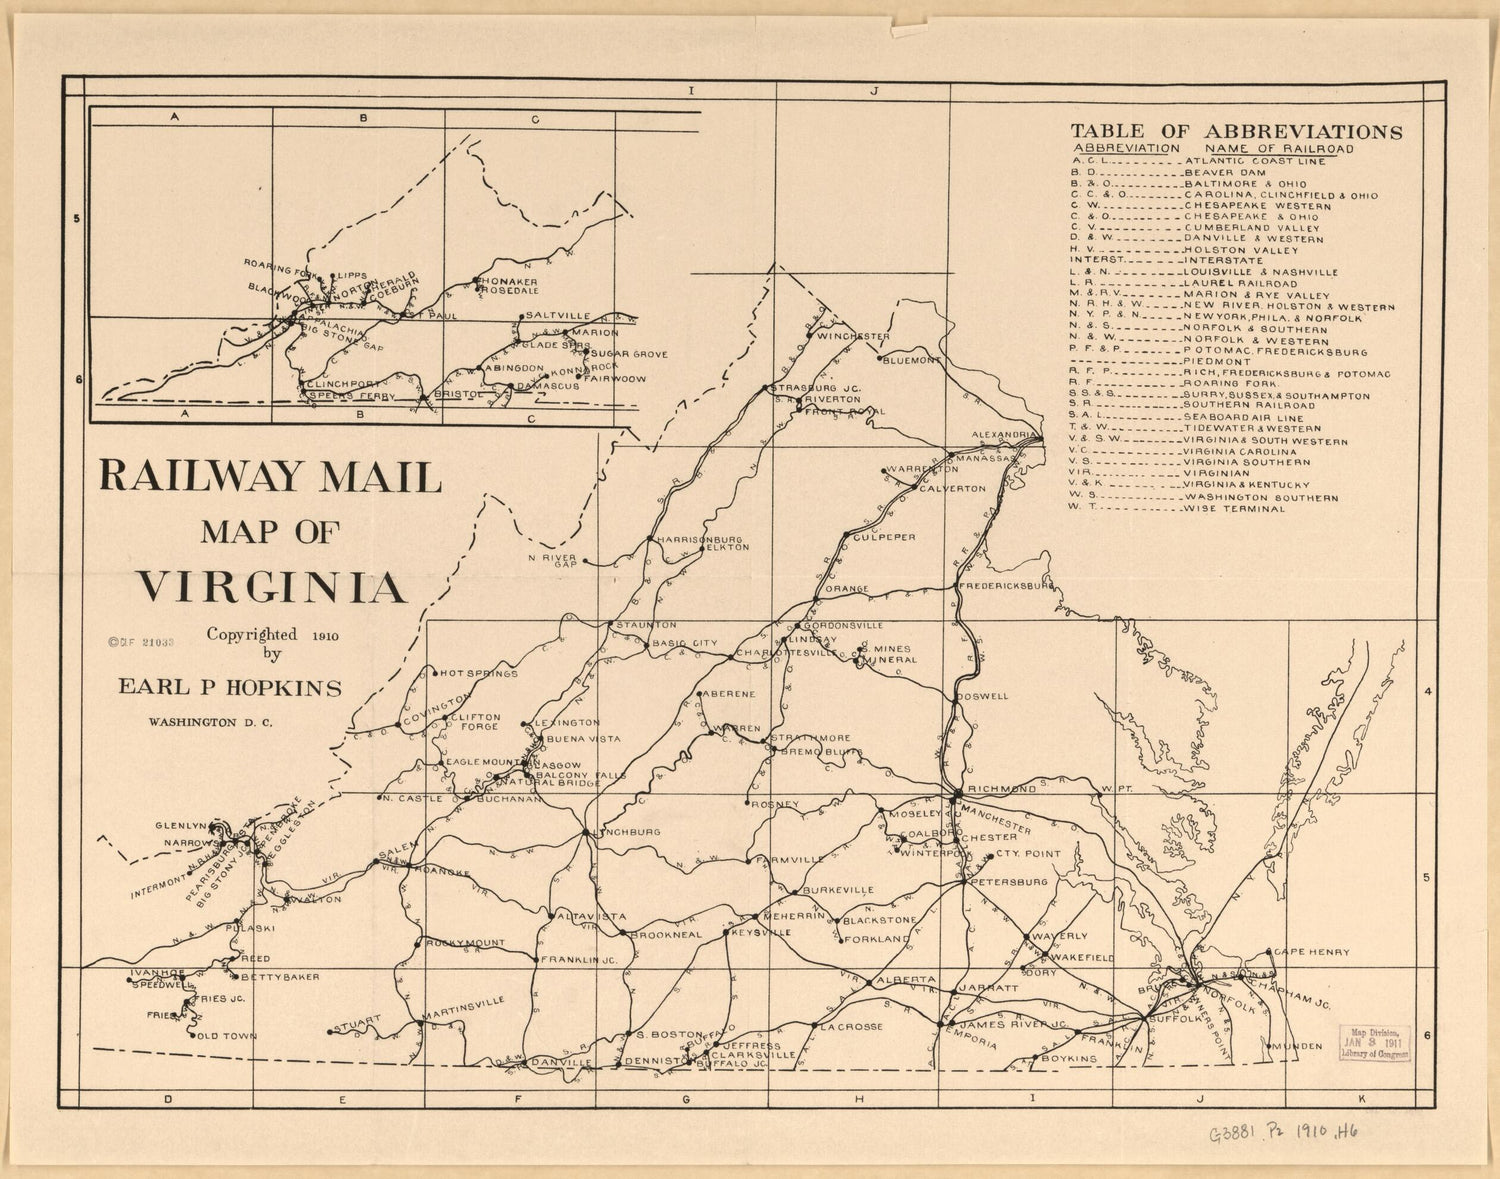 This old map of Railway Mail Map of Virginia from 1910 was created by Earl P. (Earl Palmer) Hopkins in 1910